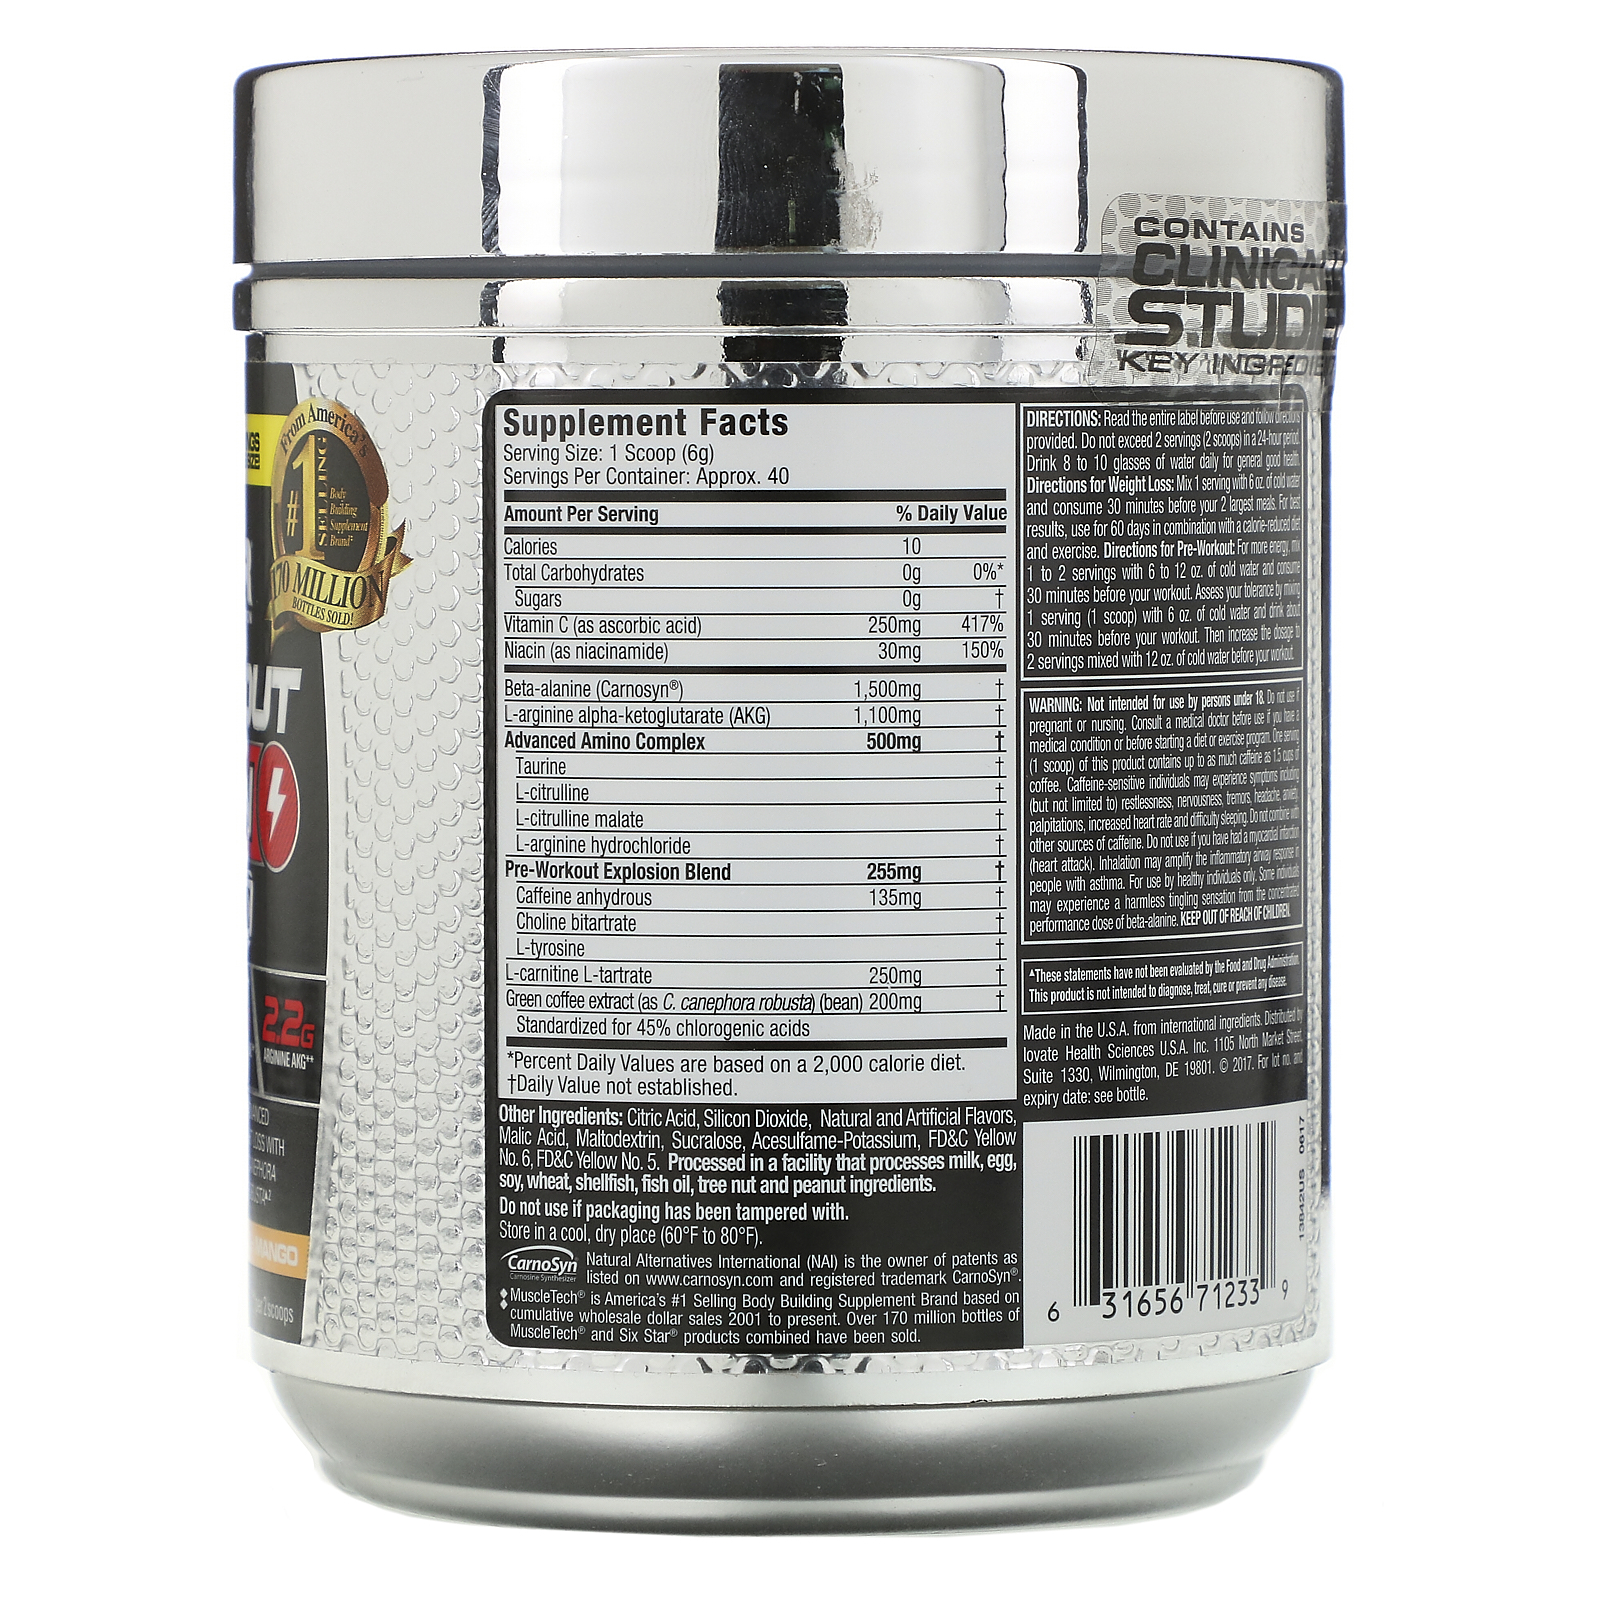 15 Minute Six Star Preworkout Explosion Ripped Reviews for Burn Fat fast